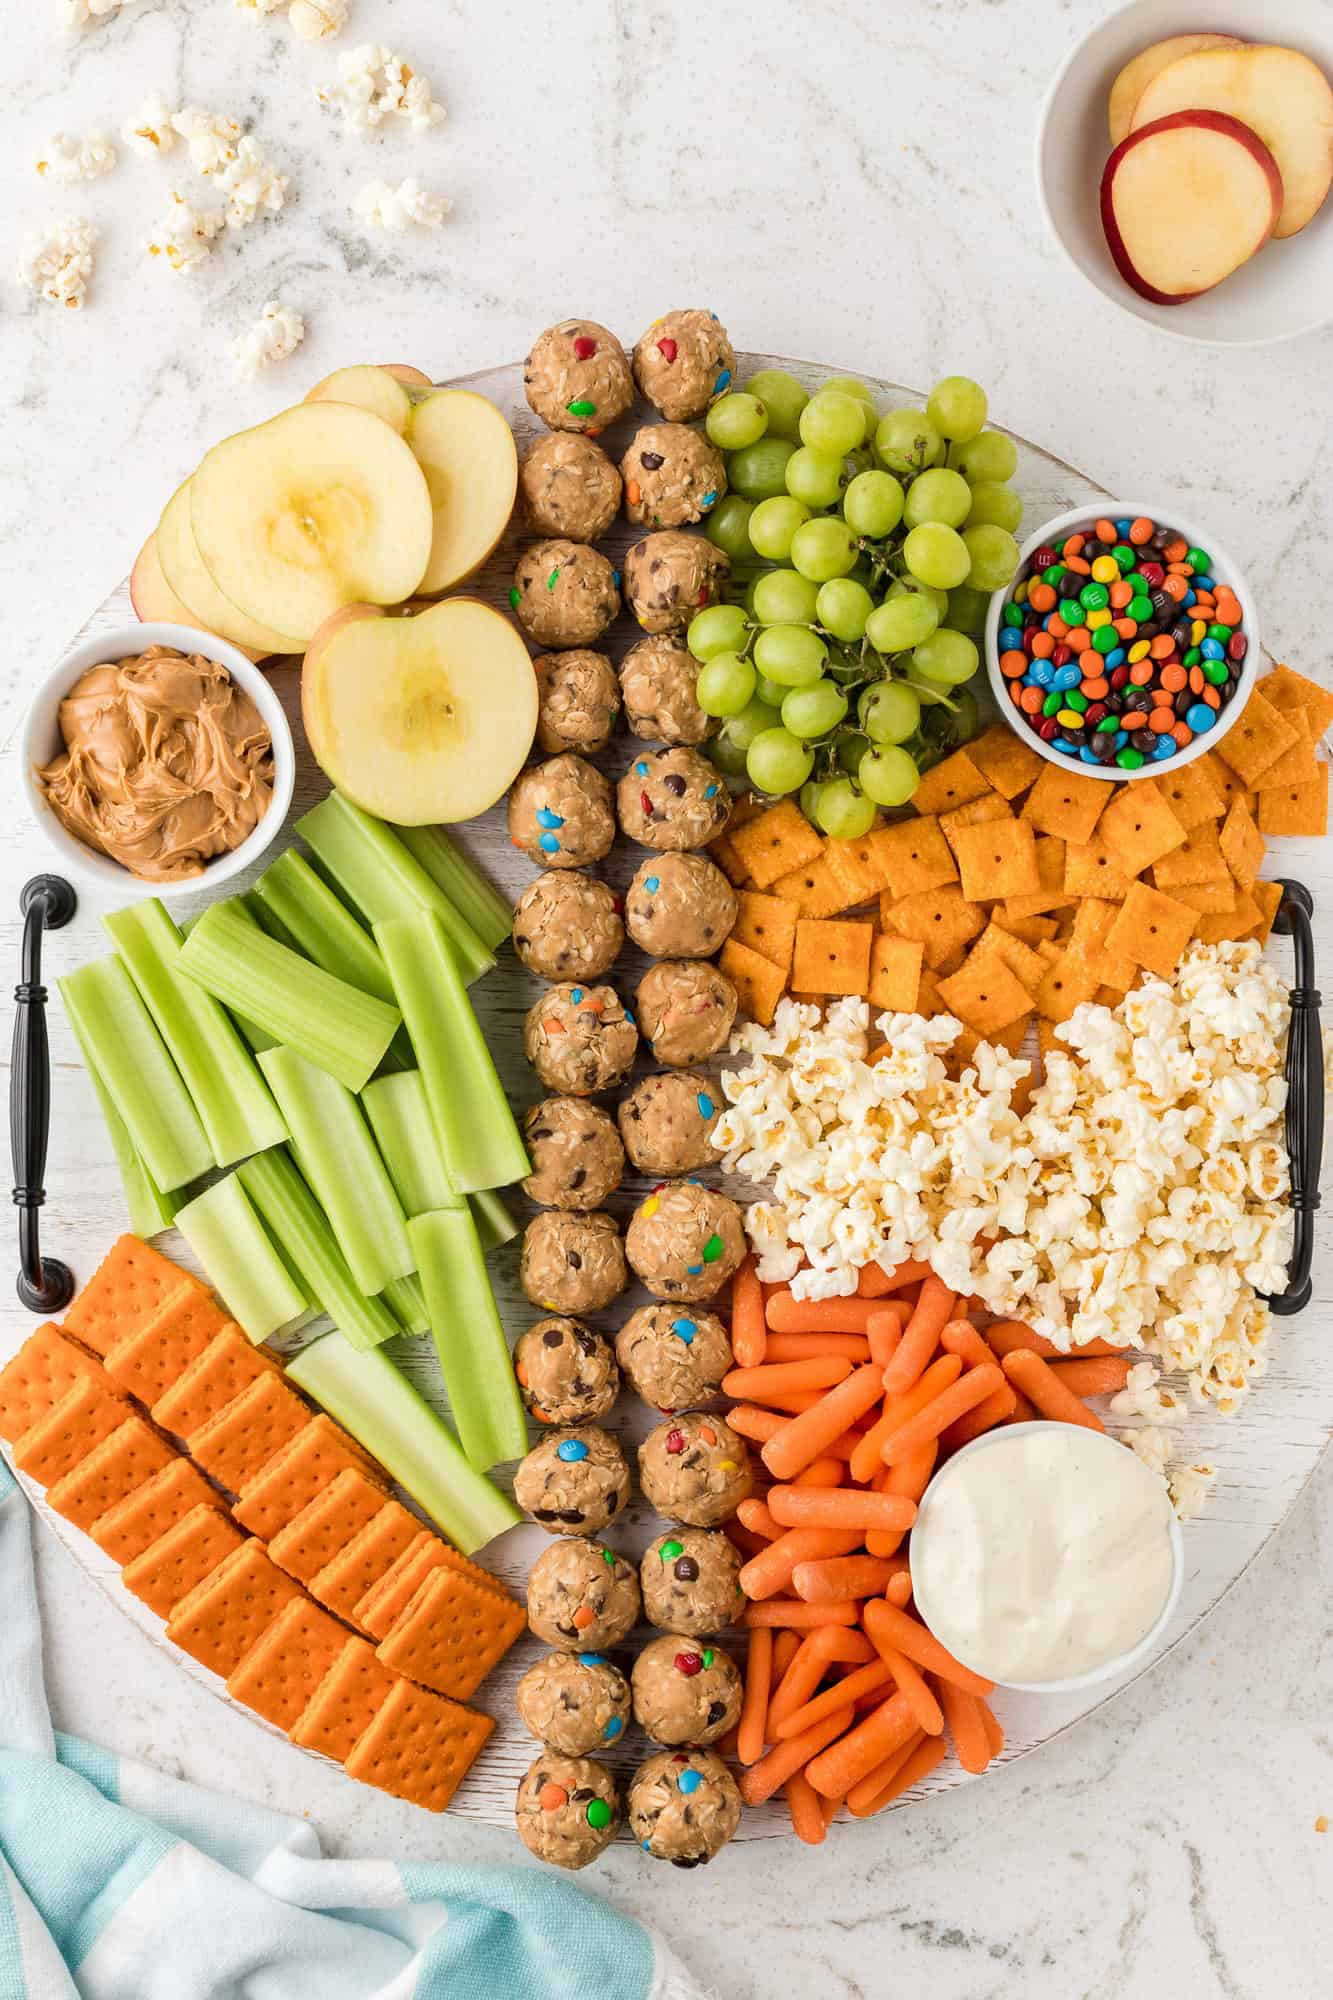 Snack board with carrots, celery, crackers, popcorn.